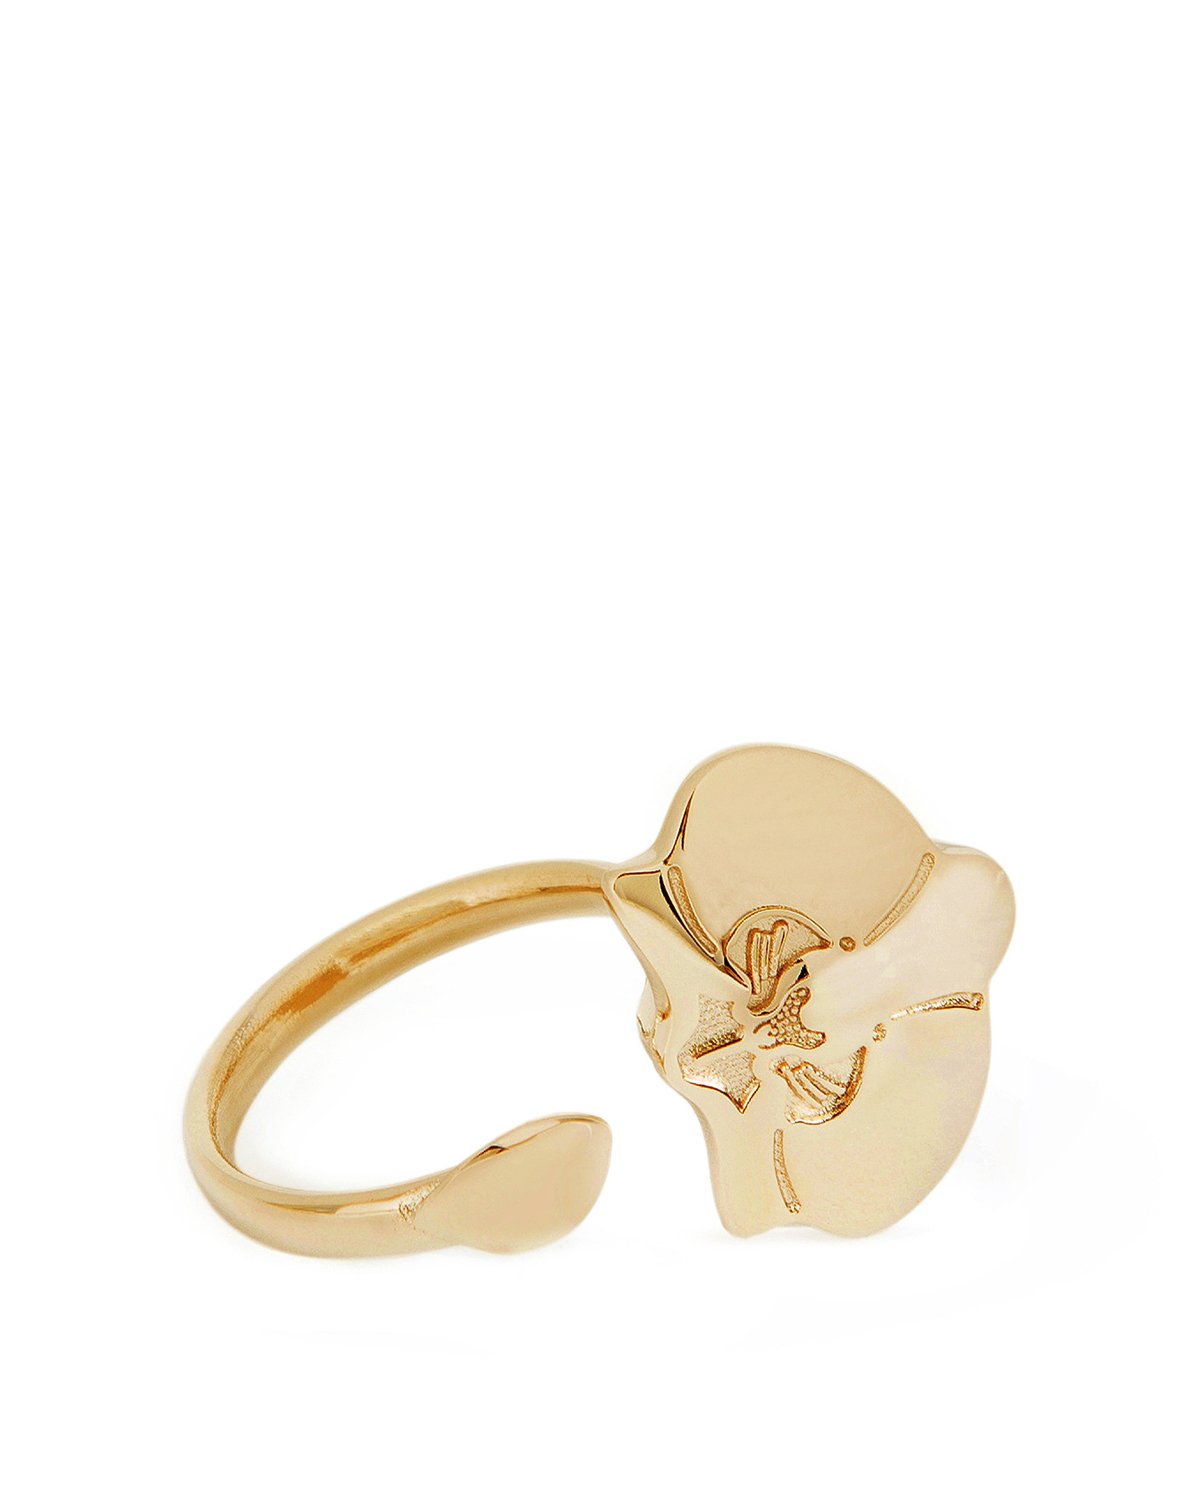 Open gold-plated ring | Accessories, Jewelry, Gifts, Accessories, Cruise 2023 Collection, Valentine's Day, Mother's Day | Genny